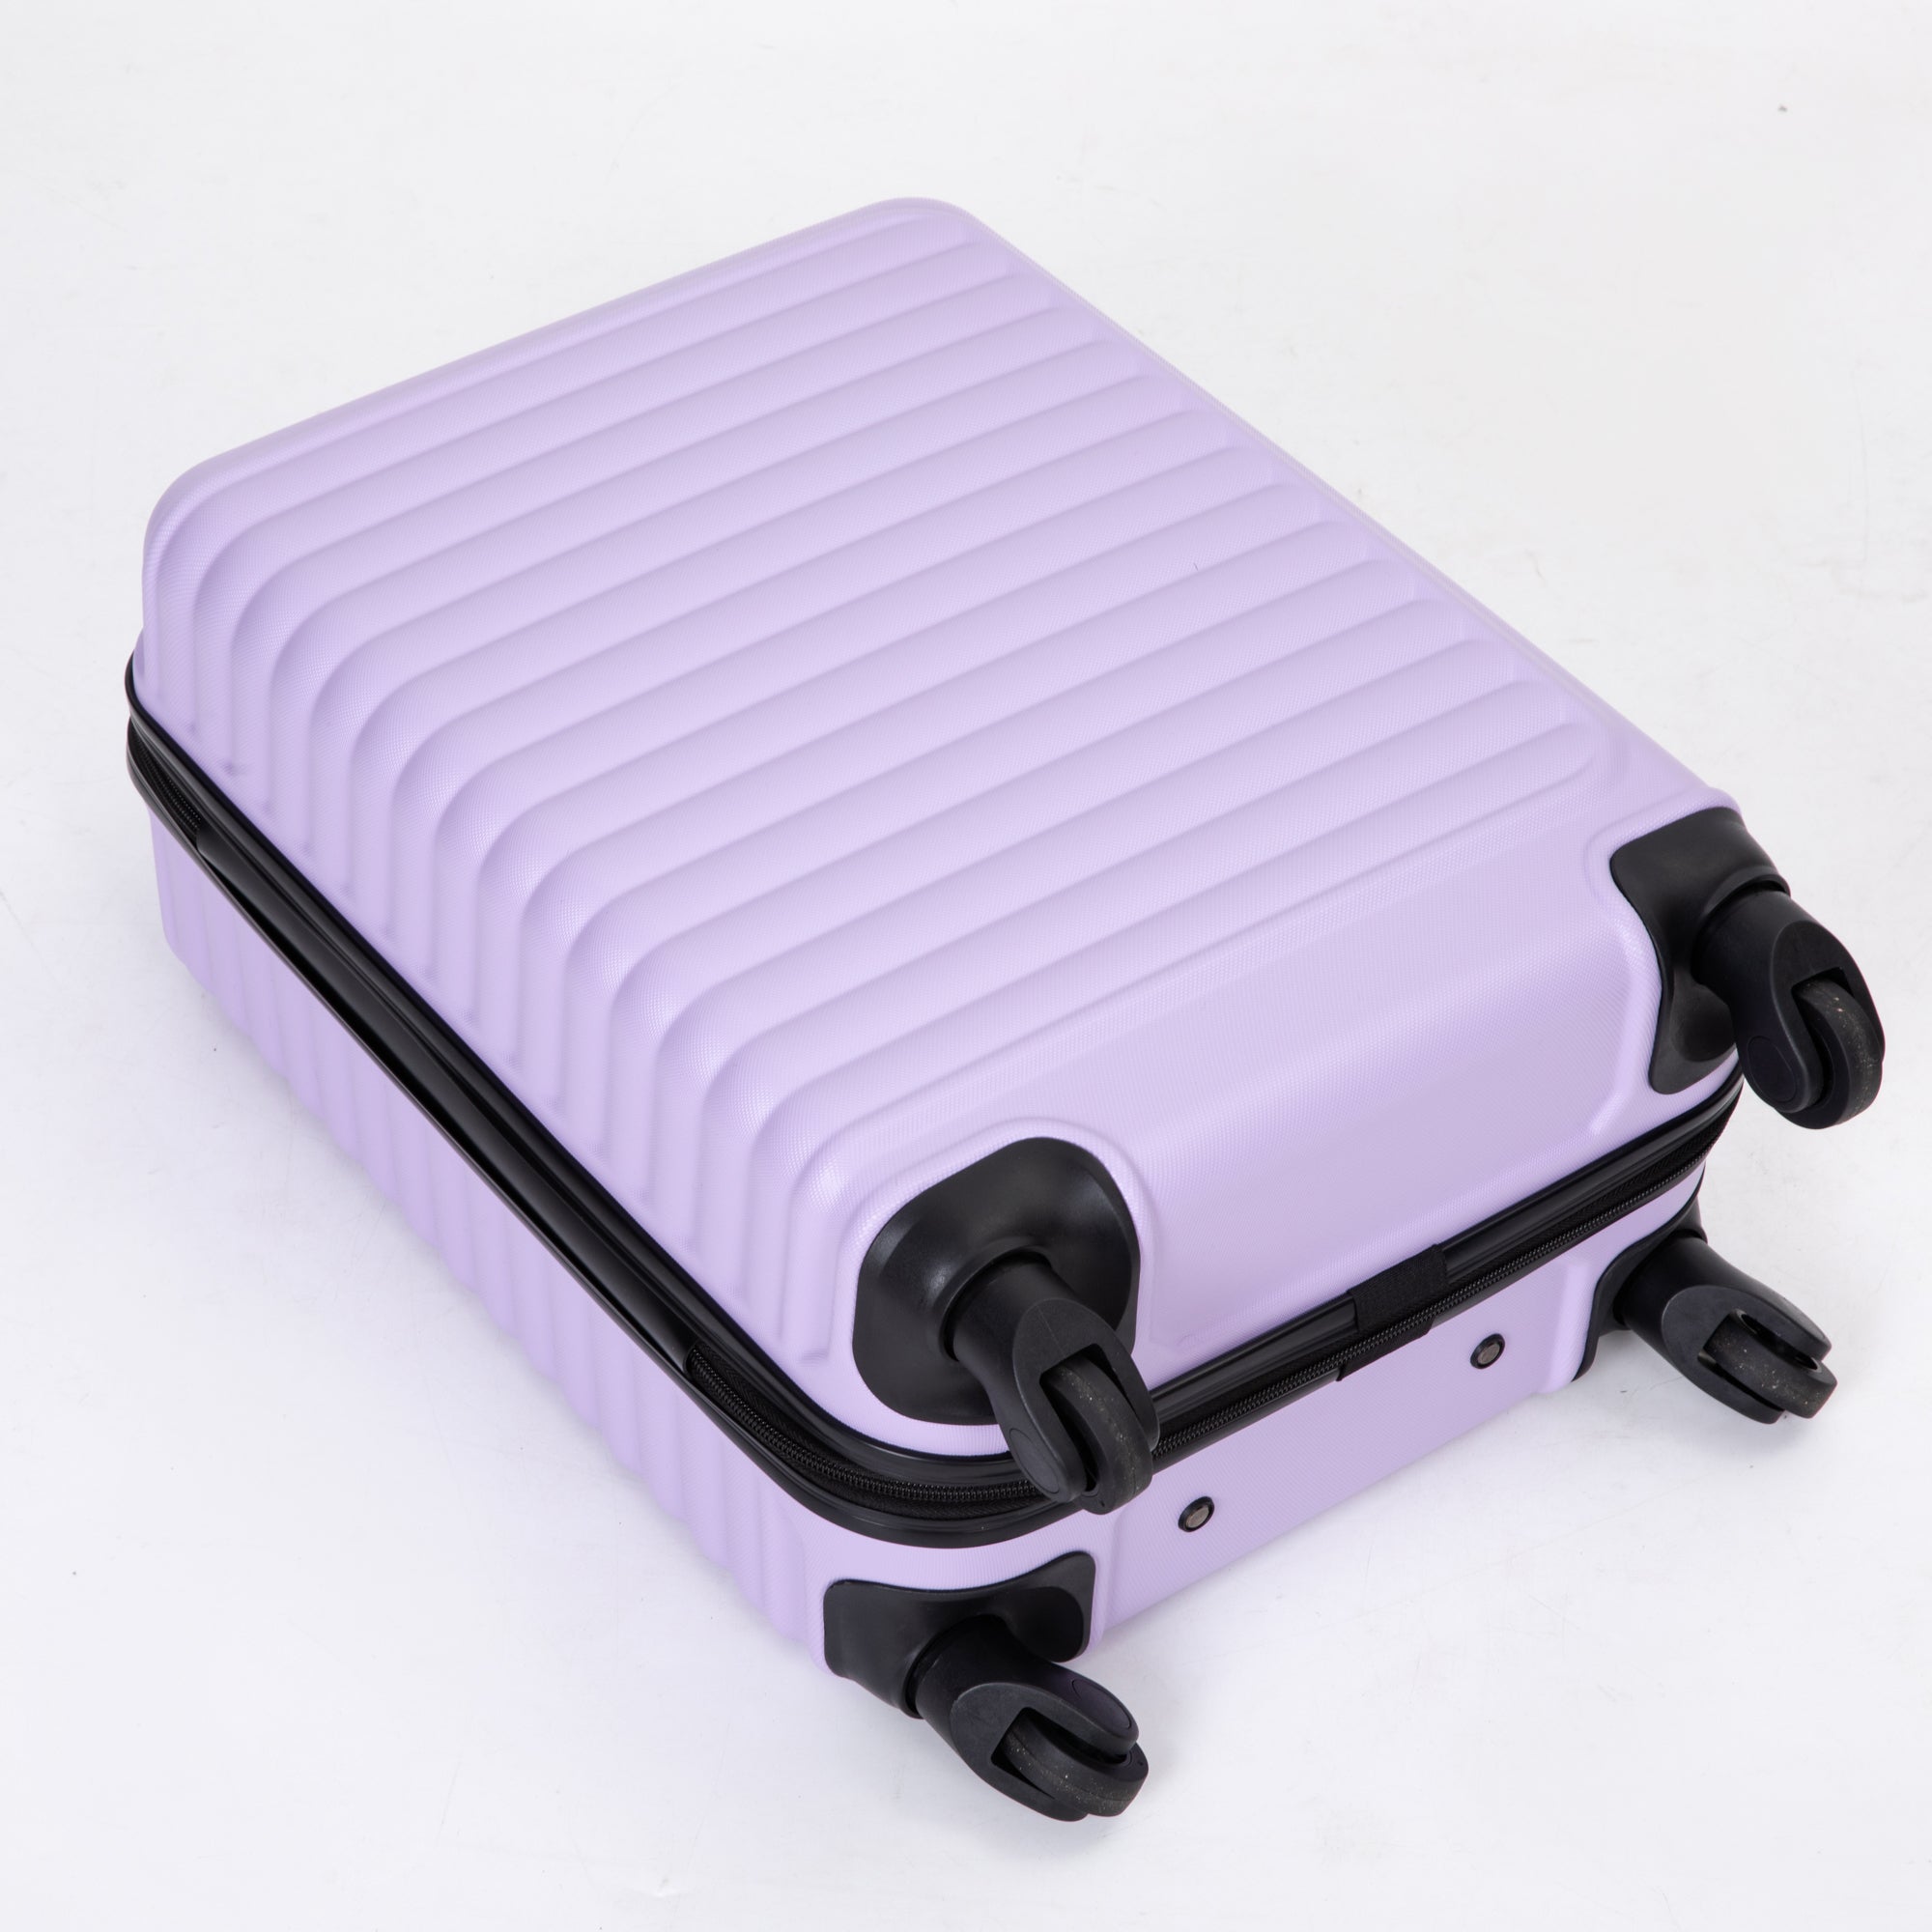 20" Carry on Luggage Lightweight Suitcase, Spinner lavender purple-abs